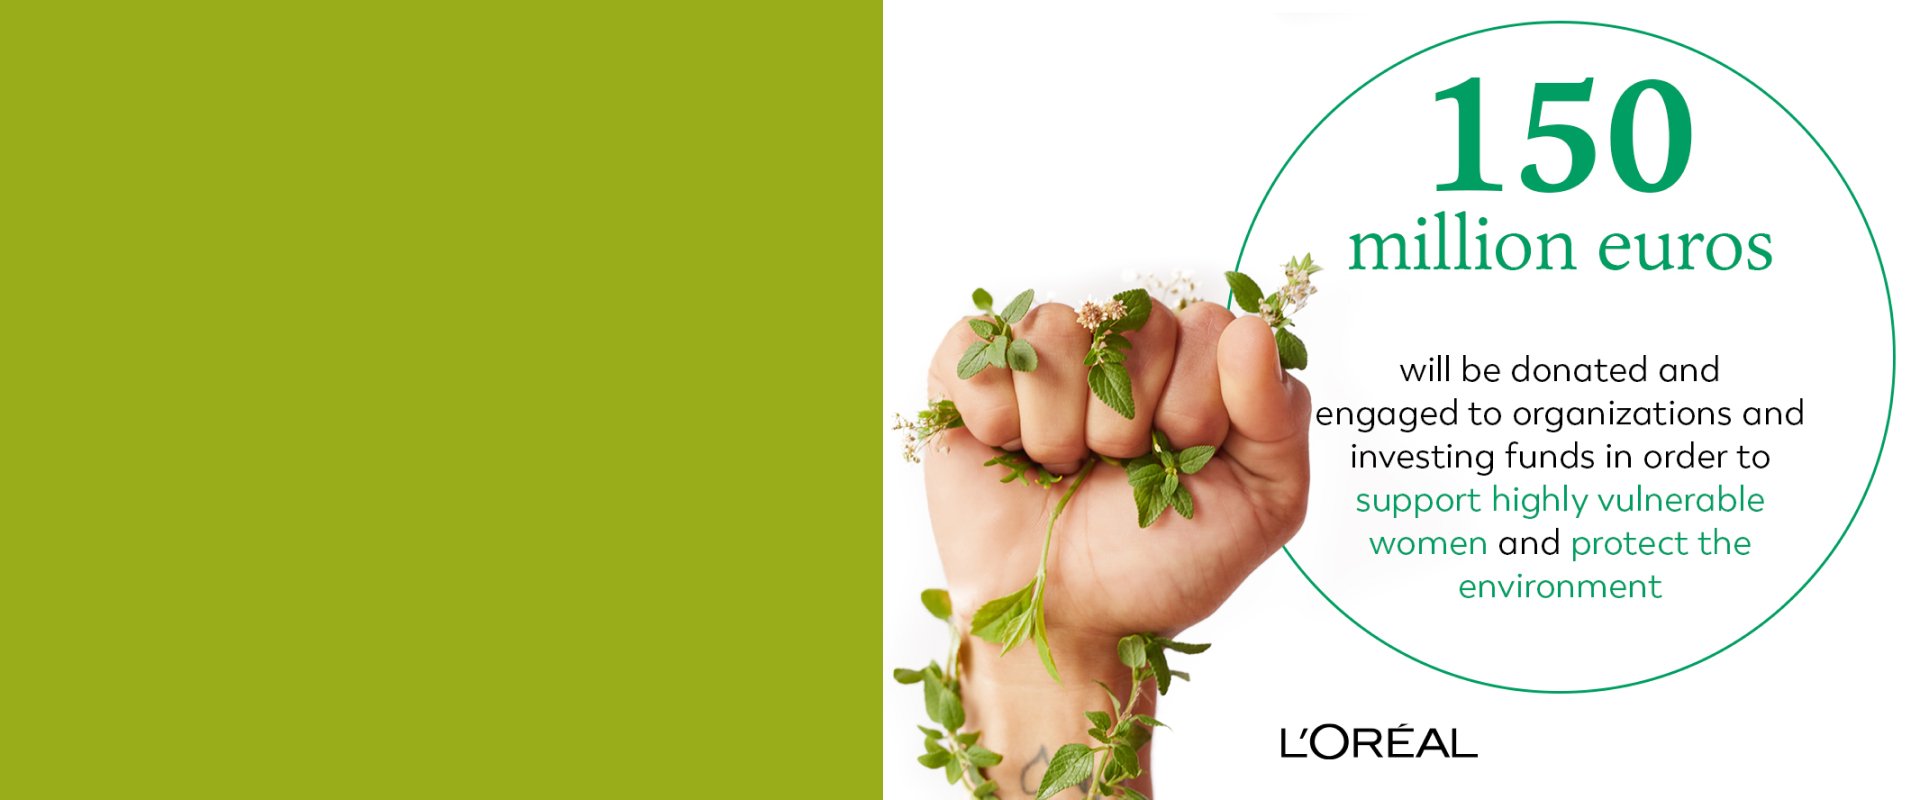 L’Oréal Announces The Creation Of Its Program L’Oréal For The Future: €150 Million To Support Vulnerable Women And Protect The Environment